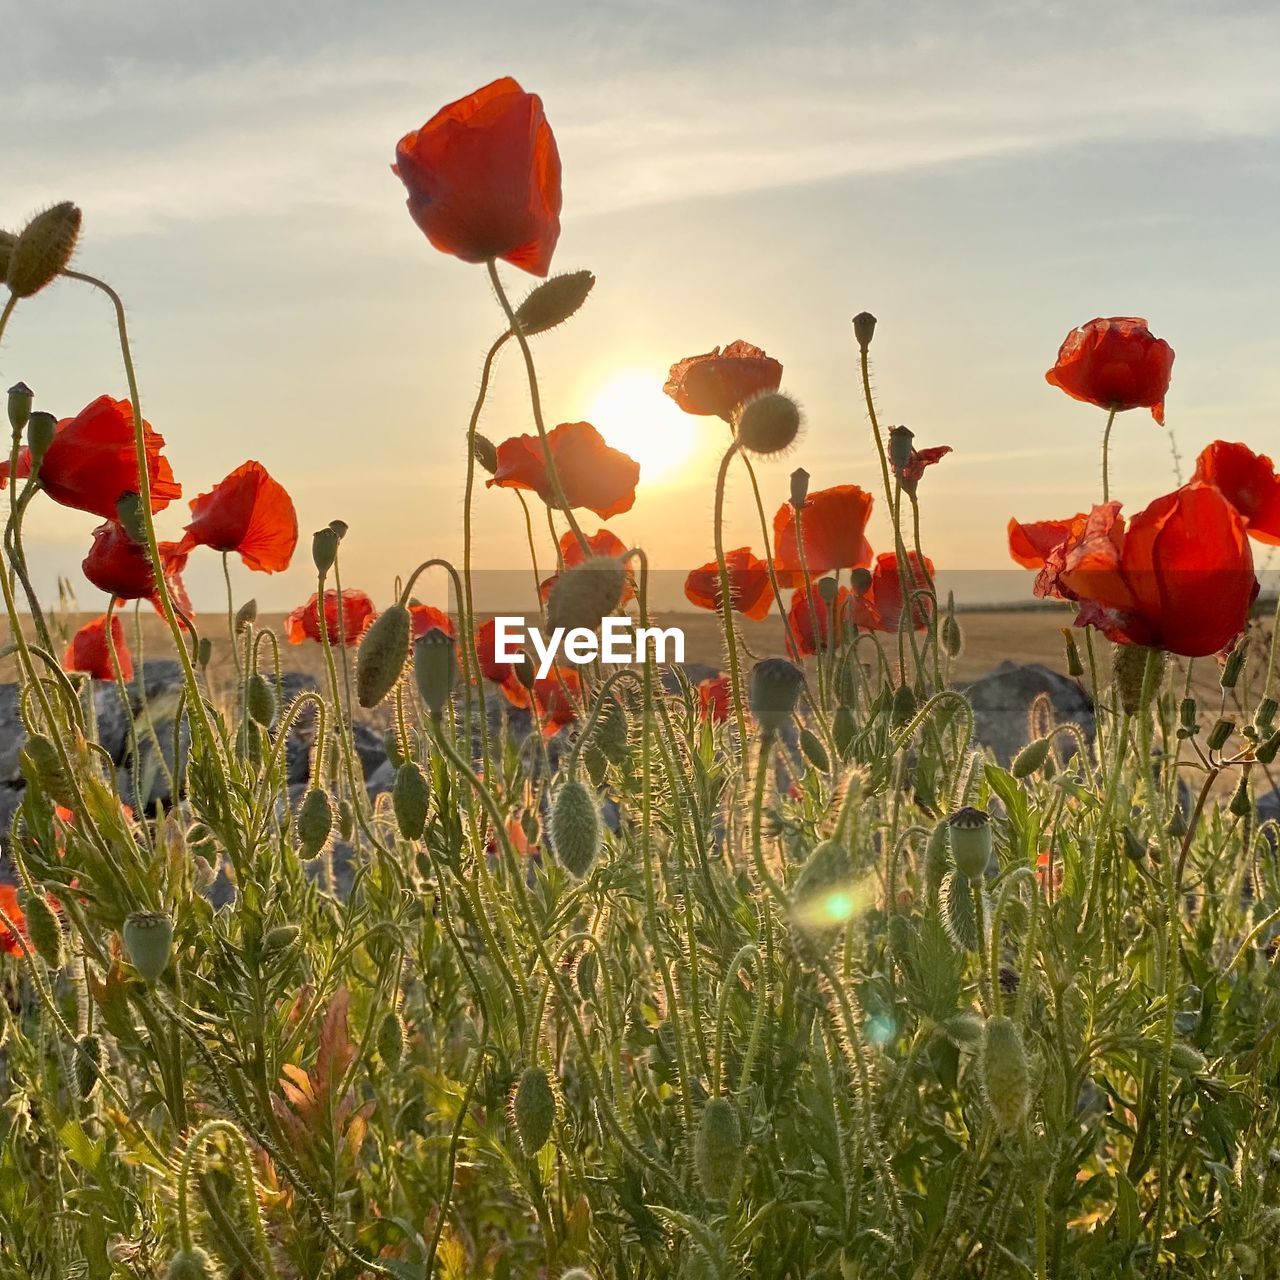 plant, flower, red, poppy, nature, beauty in nature, flowering plant, sky, land, field, landscape, freshness, growth, environment, cloud, sunset, no people, grass, rural scene, meadow, wildflower, sunlight, tranquility, outdoors, flower head, petal, scenics - nature, summer, inflorescence, agriculture, springtime, fragility, tranquil scene, non-urban scene, day, back lit, plain, close-up, multi colored, sun, idyllic